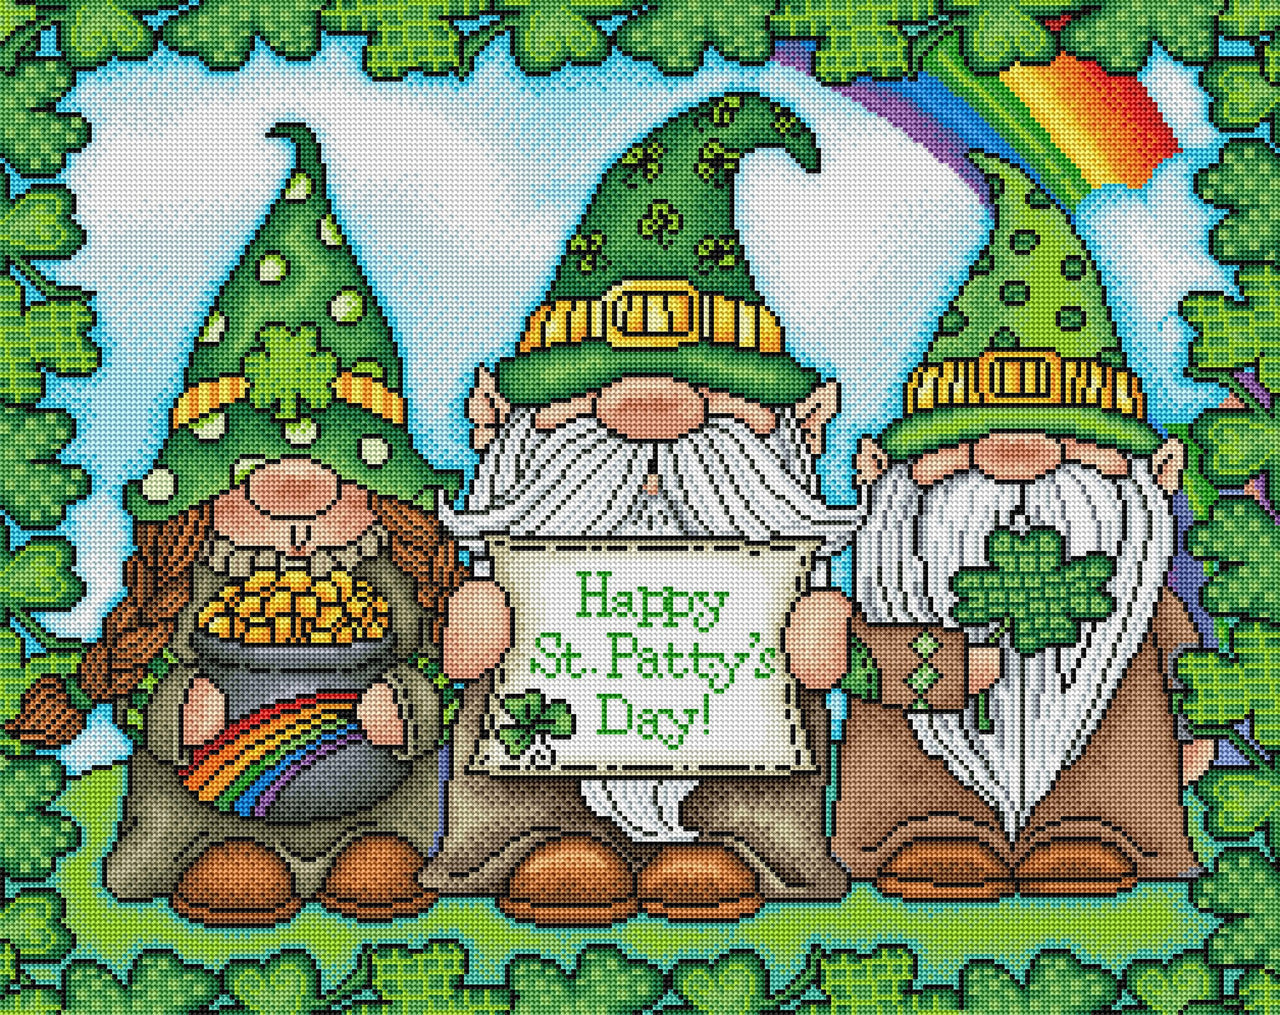 Diamond Painting St. Patrick's Day Gnomes 28" x 22" (71cm x 56cm) / Round with 55 Colors including 5 ABs / 49,949